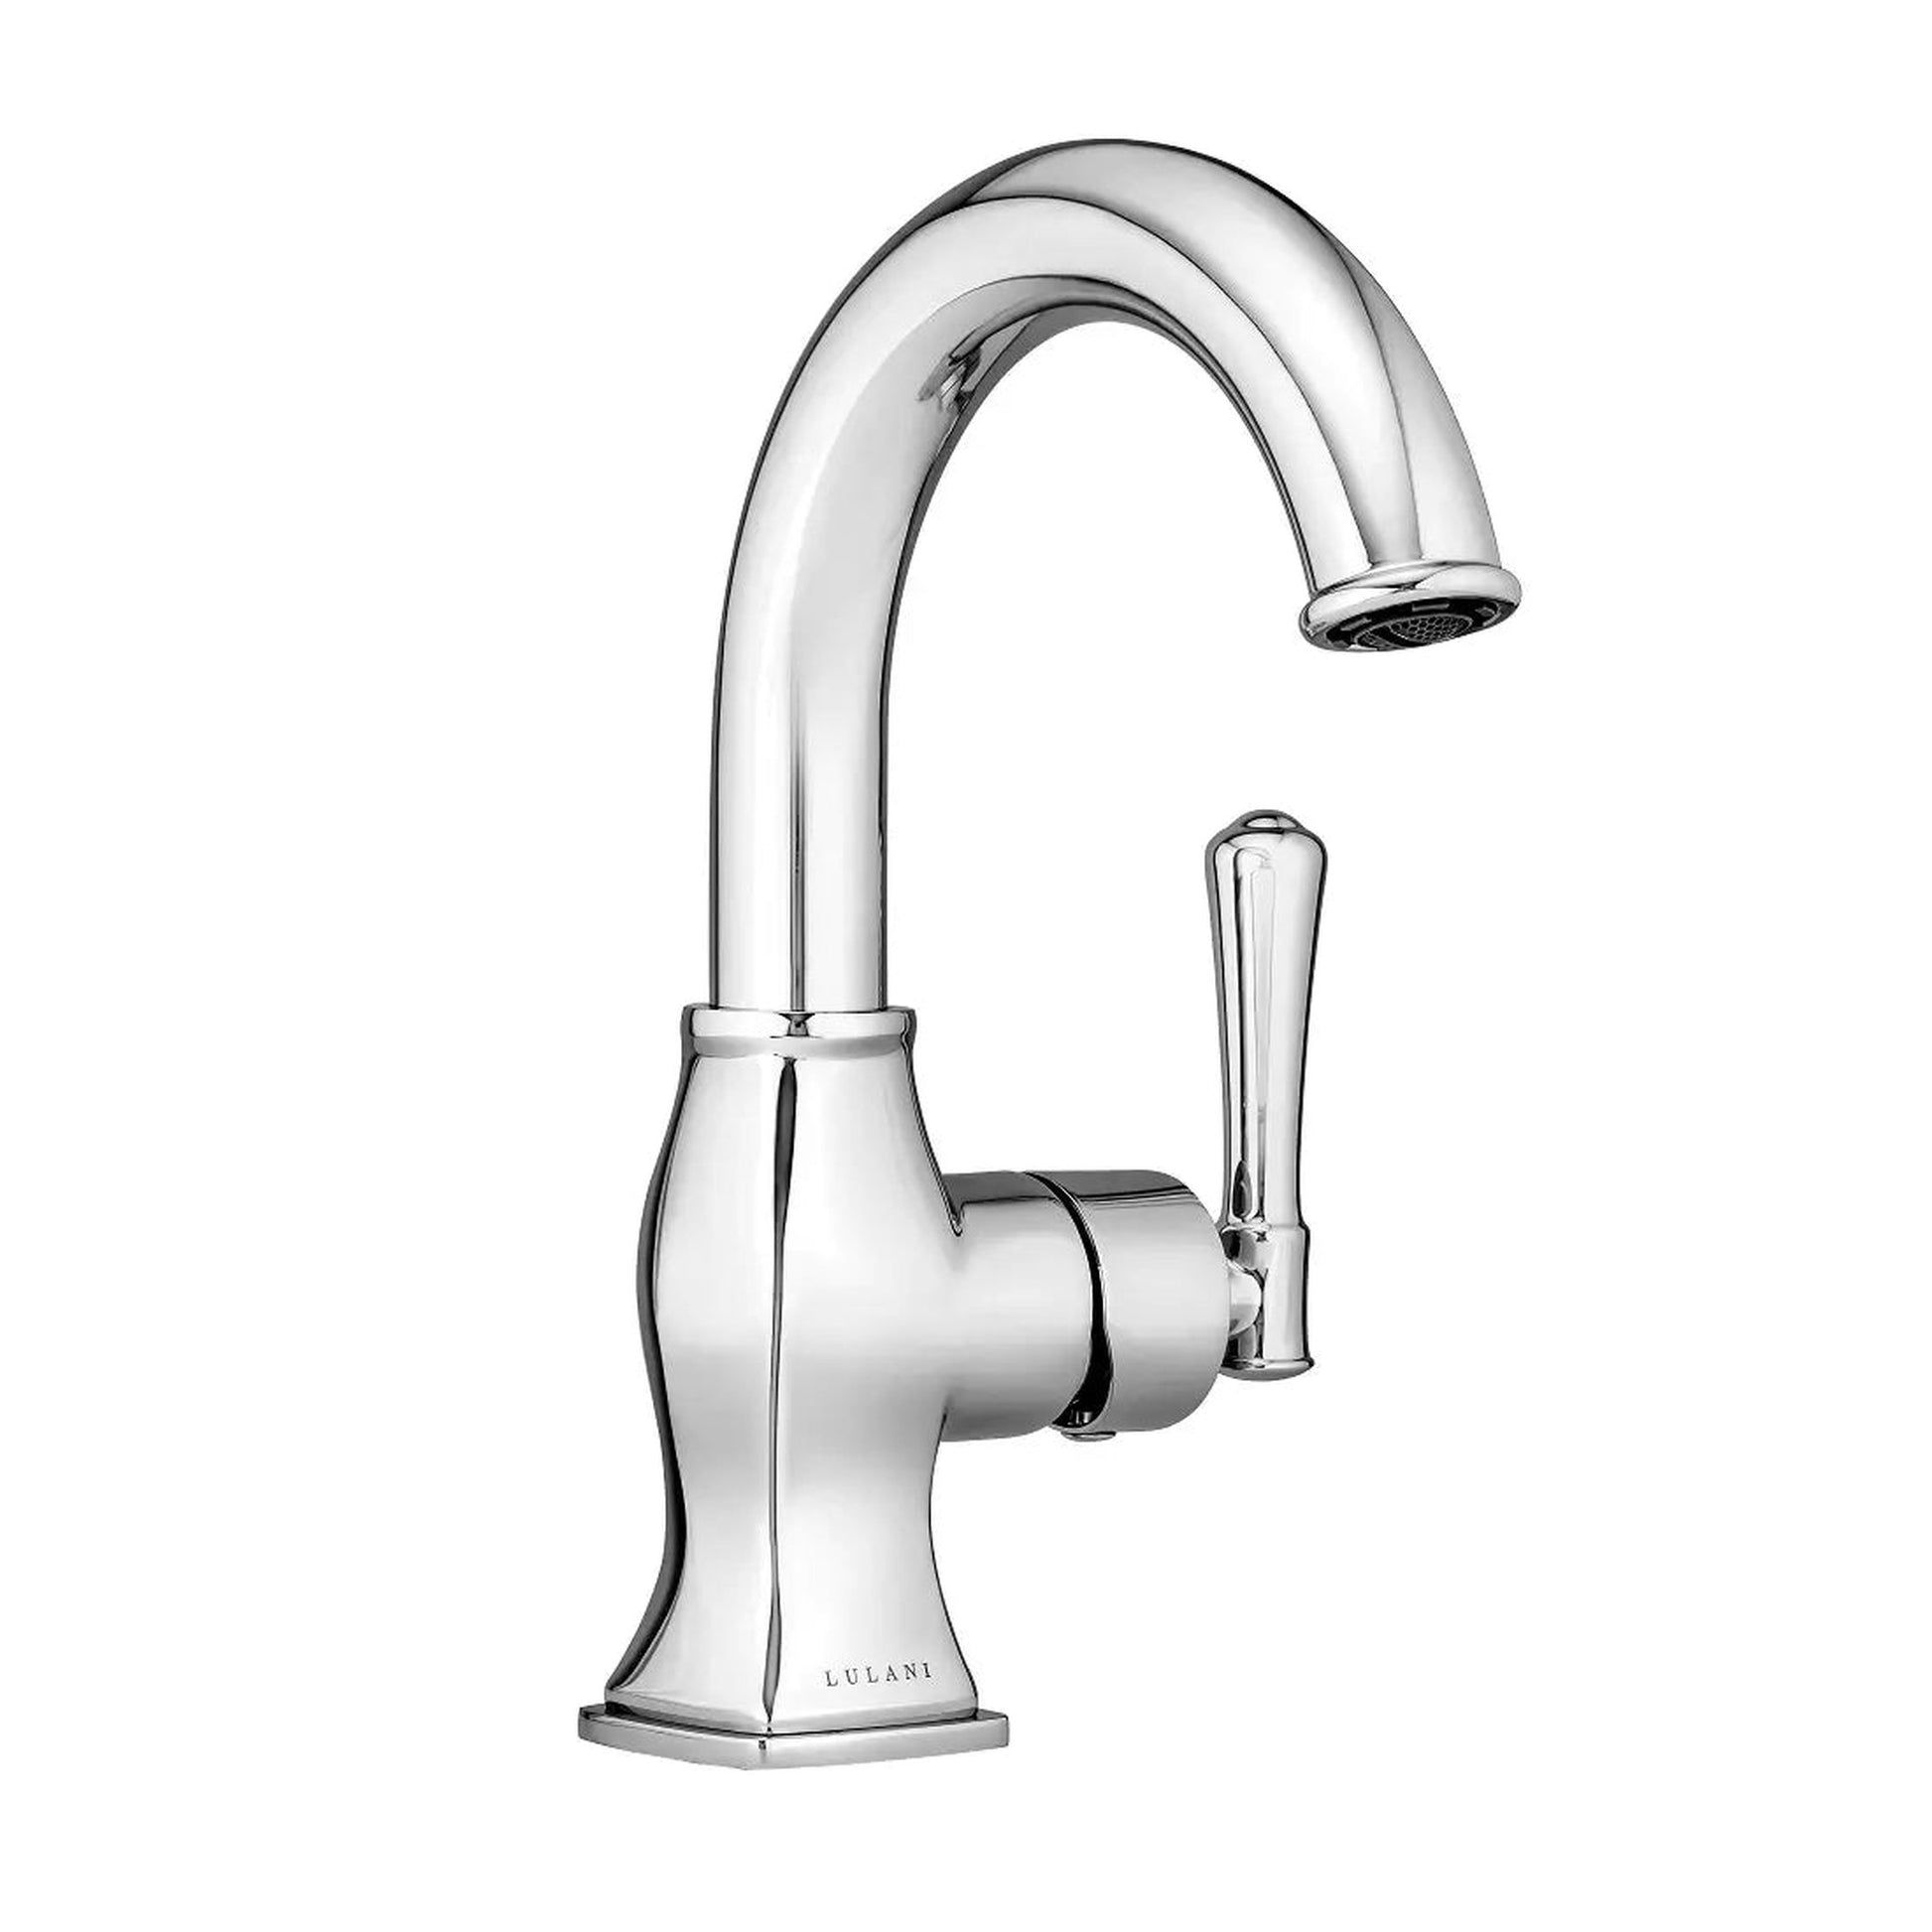 Lulani Aurora Chrome 1.2 GPM Single Hole 1-Handle Brass Faucet With Drain Assembly